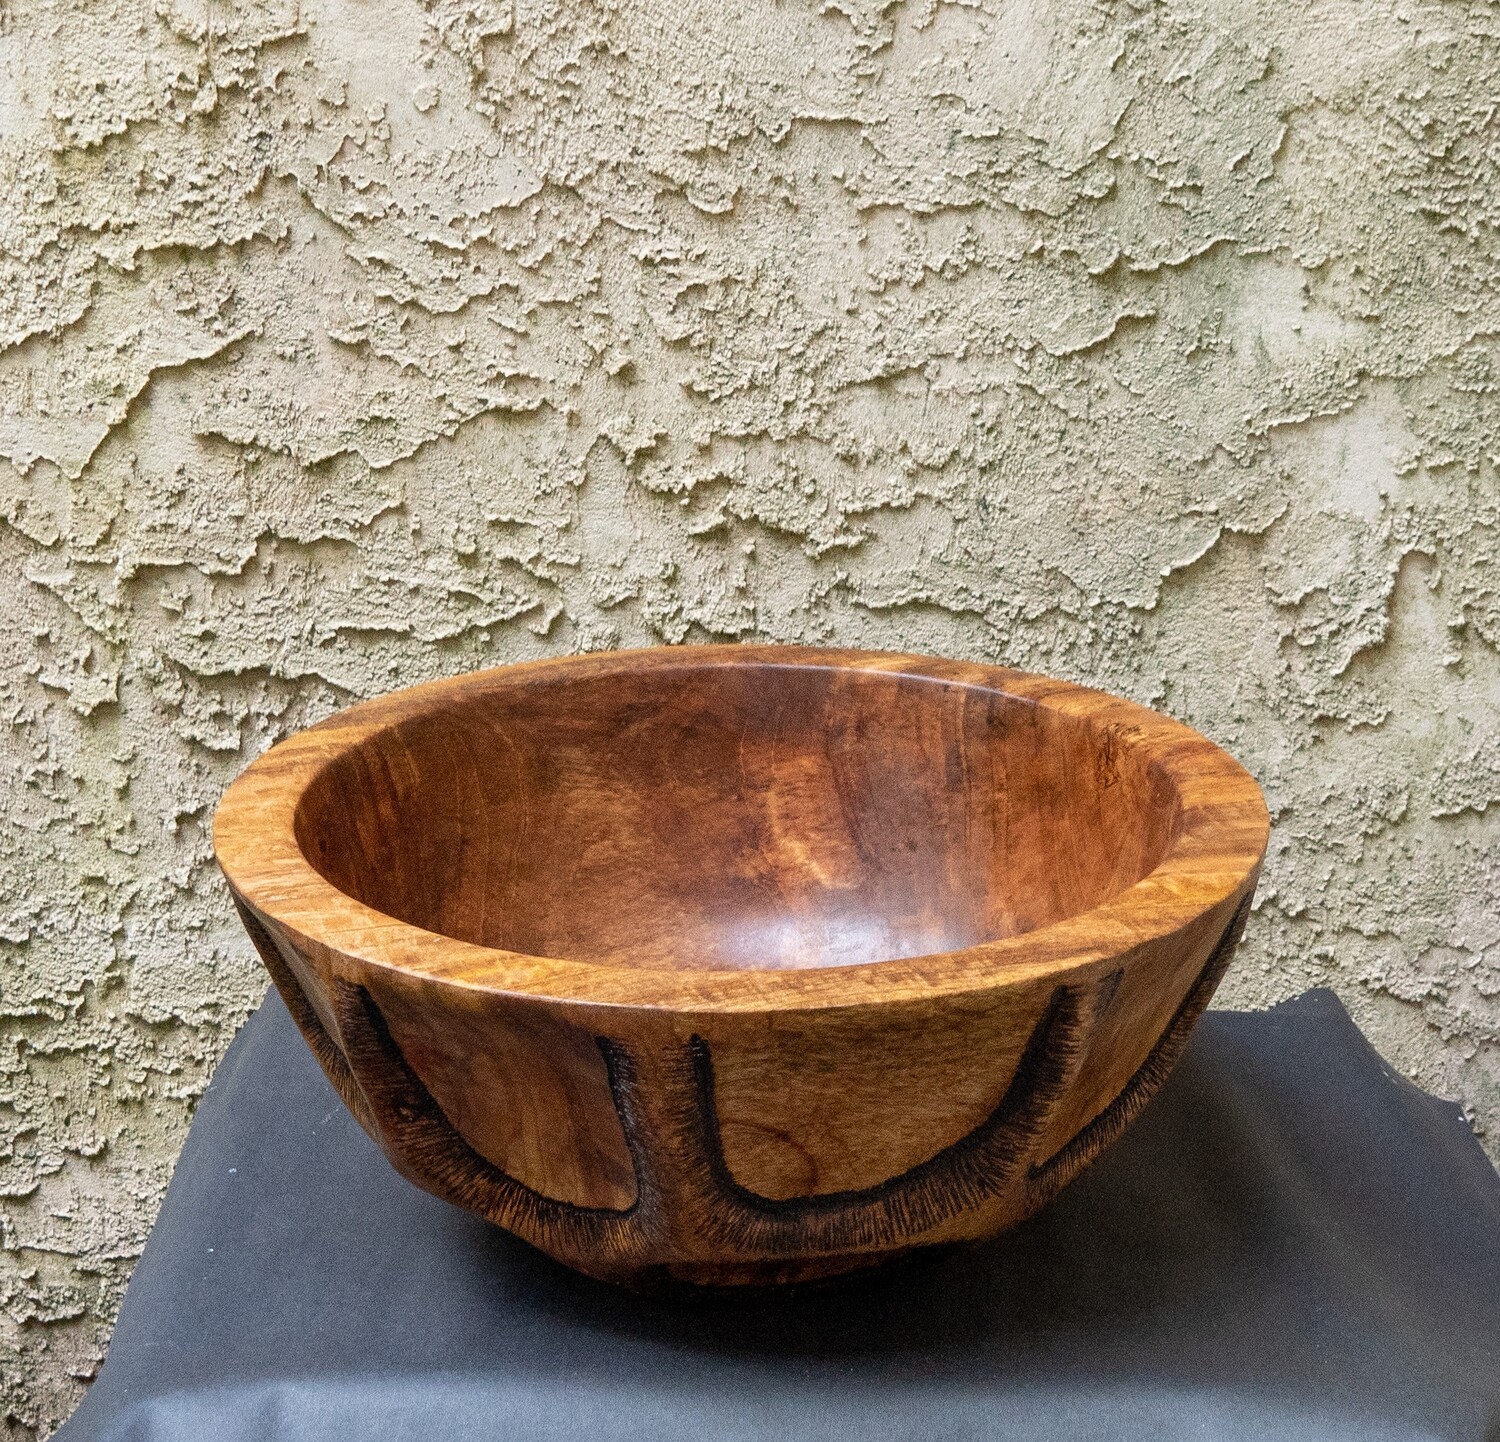 Unique Turned Carved Large
Mango Wood Bowl  Handmade Natural Home Décor Fruit  Candy  Cookie wooden Bowl